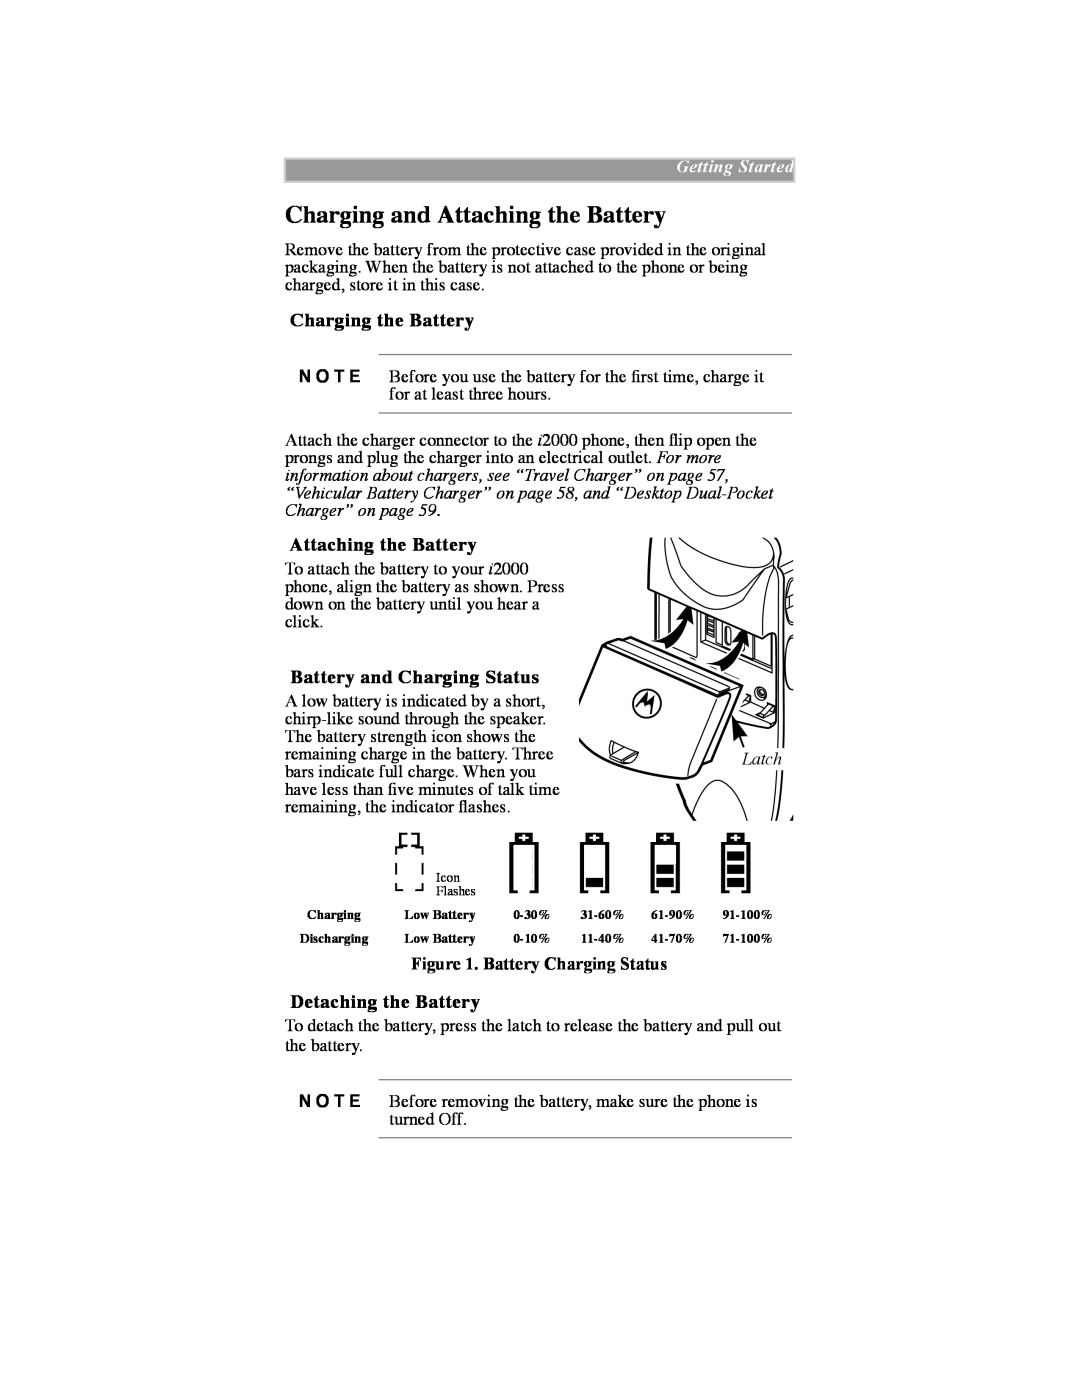 Motorola iDEN Charging and Attaching the Battery, Charging the Battery, Battery and Charging Status, Detaching the Battery 